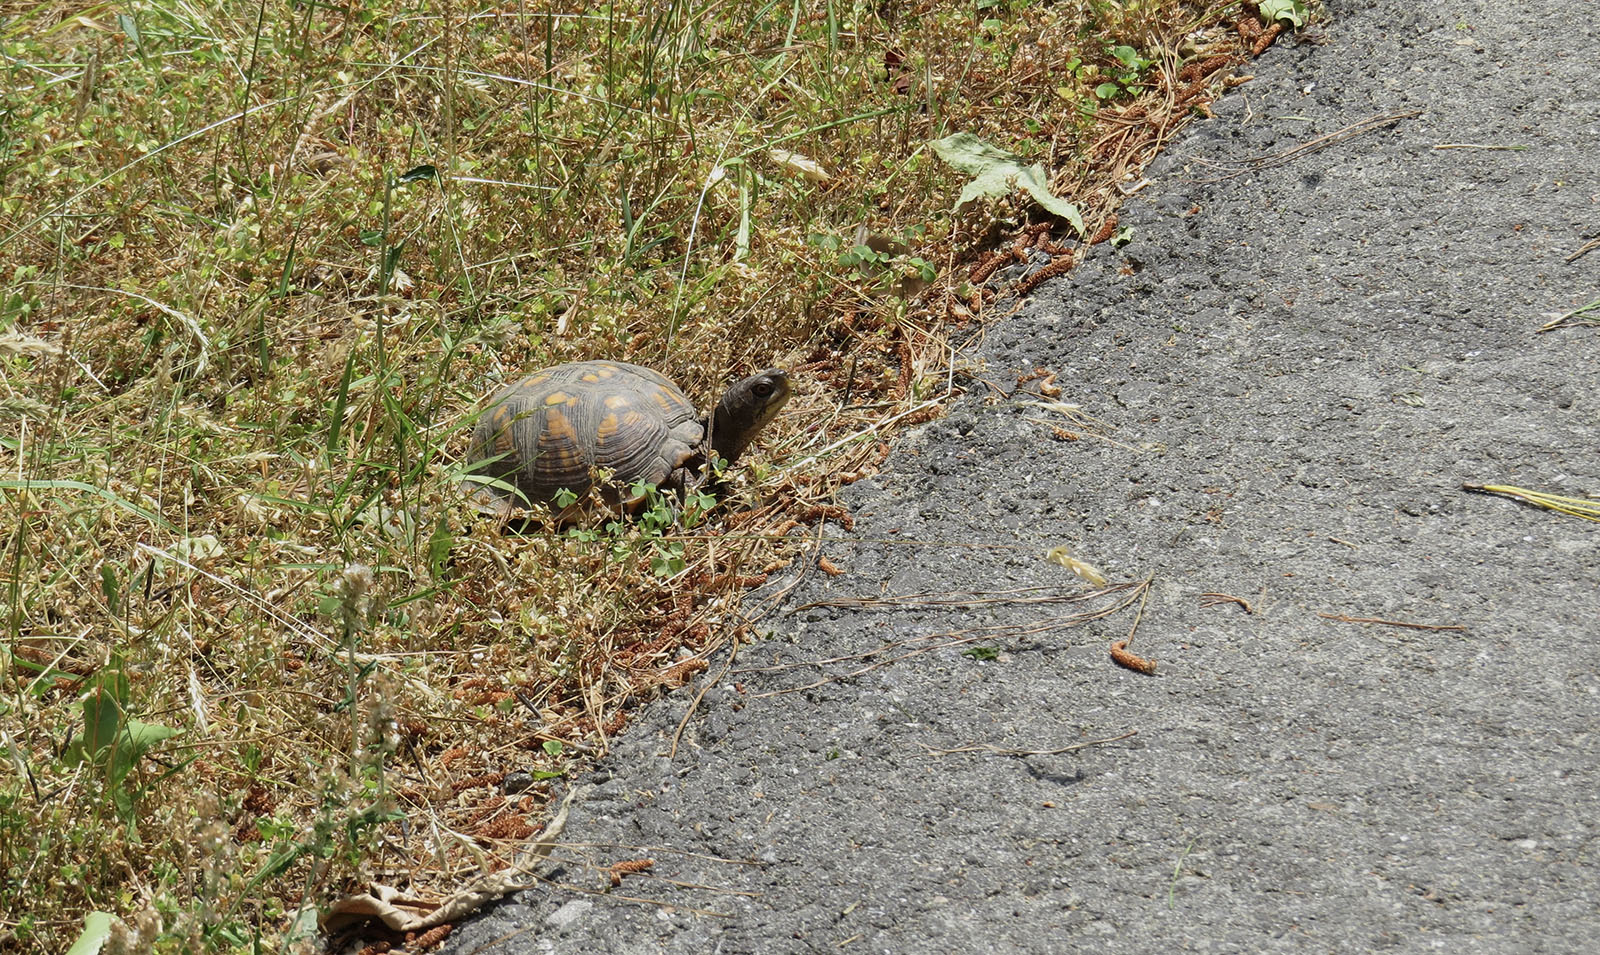 A photo of a brown and orange box turtle in the grass at the very edge of a paved road, facing into the road.